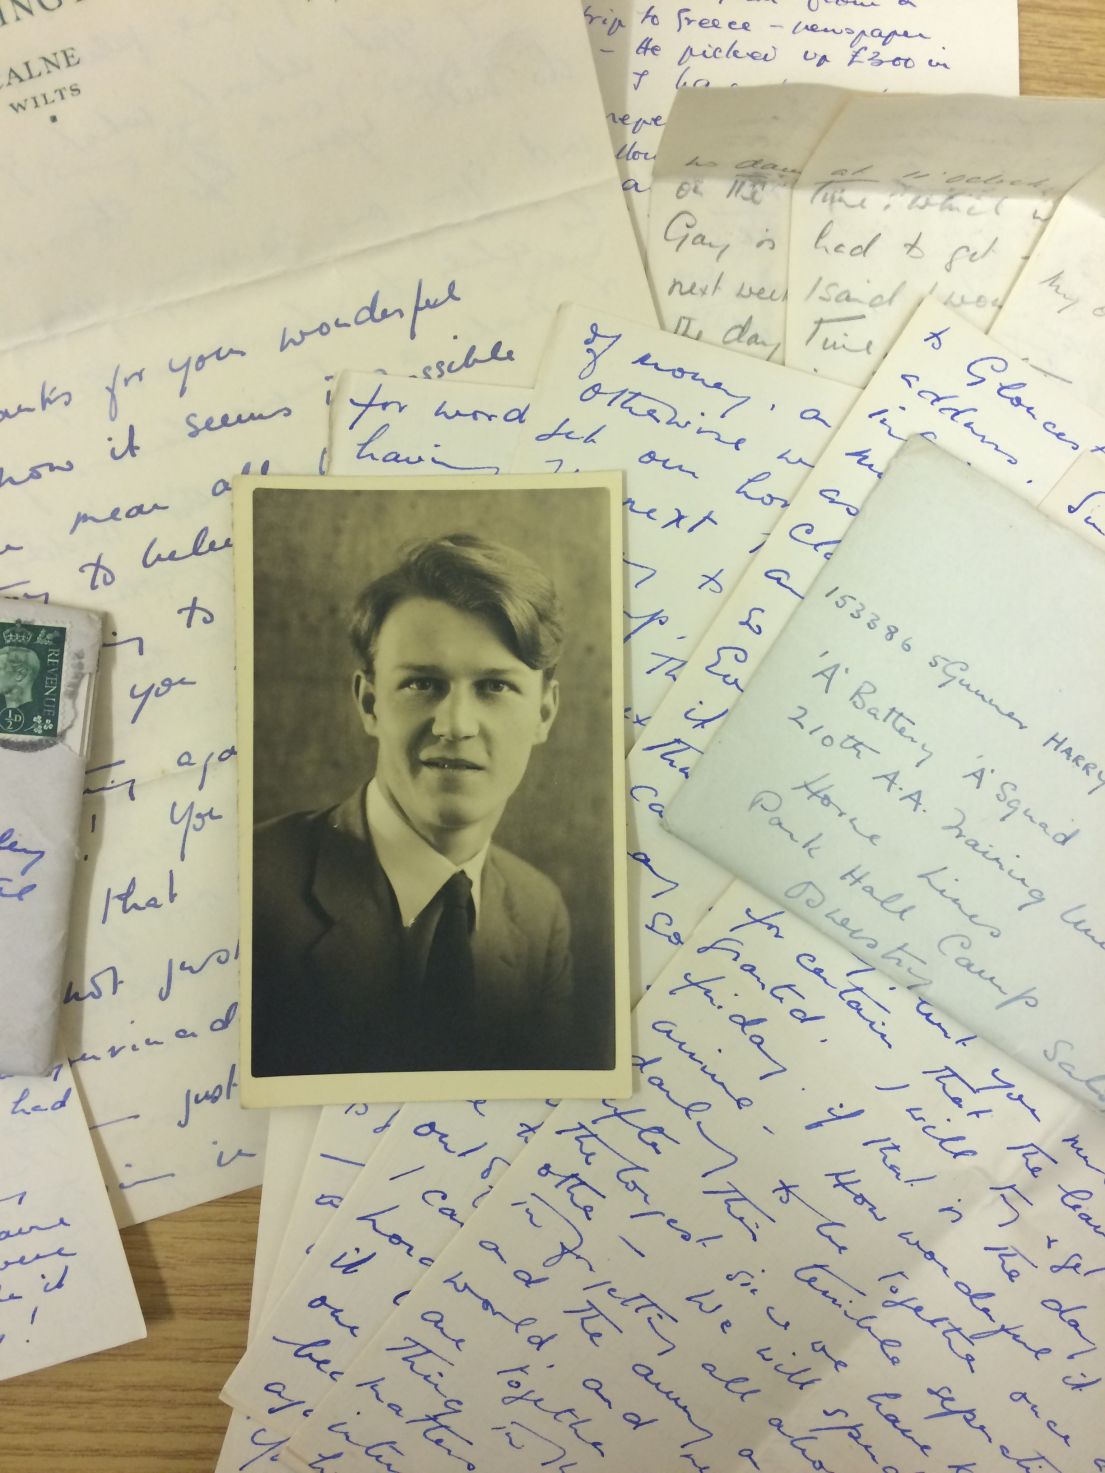 A collection of beautifully handwritten letters along with a black and white photograph headshot of a young man.